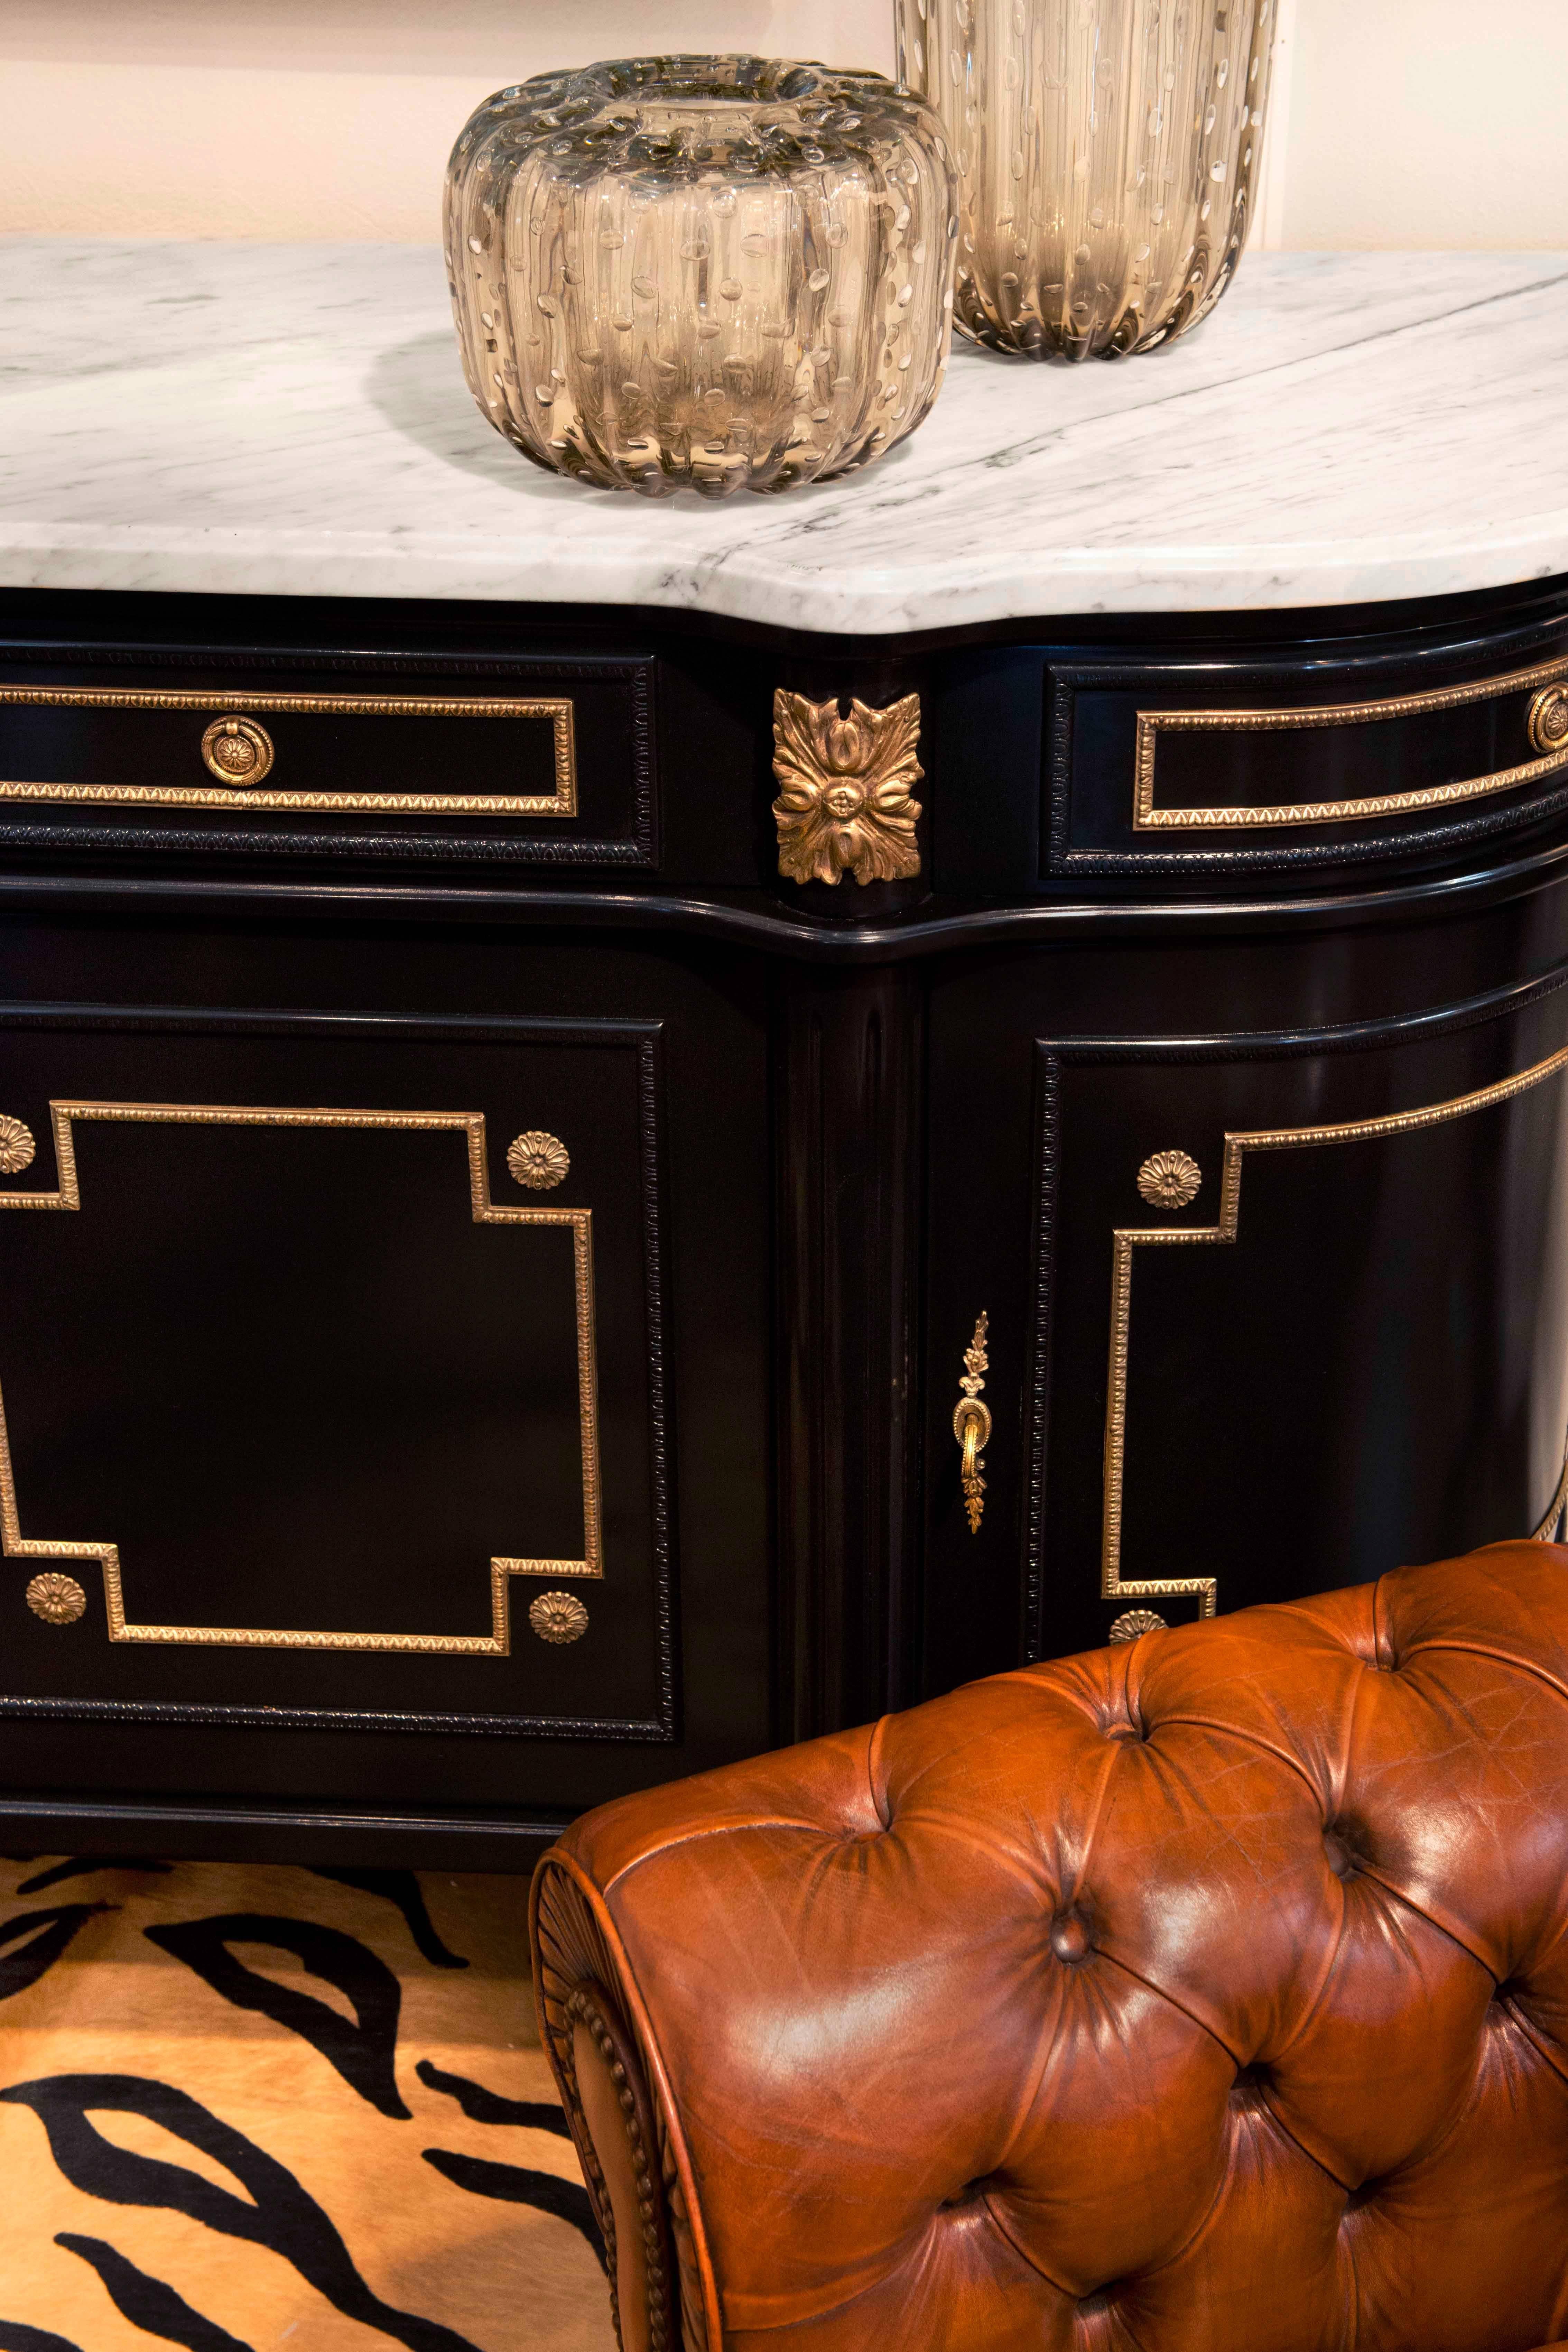 French antique buffet or enfilade of mahogany finished with a lustrous French polish. Topped with a thick slab of Carrara marble, gilt brass hardware and trim throughout. Fluted columns and feet with gilt brass caps. A spectacular craftsmanship for